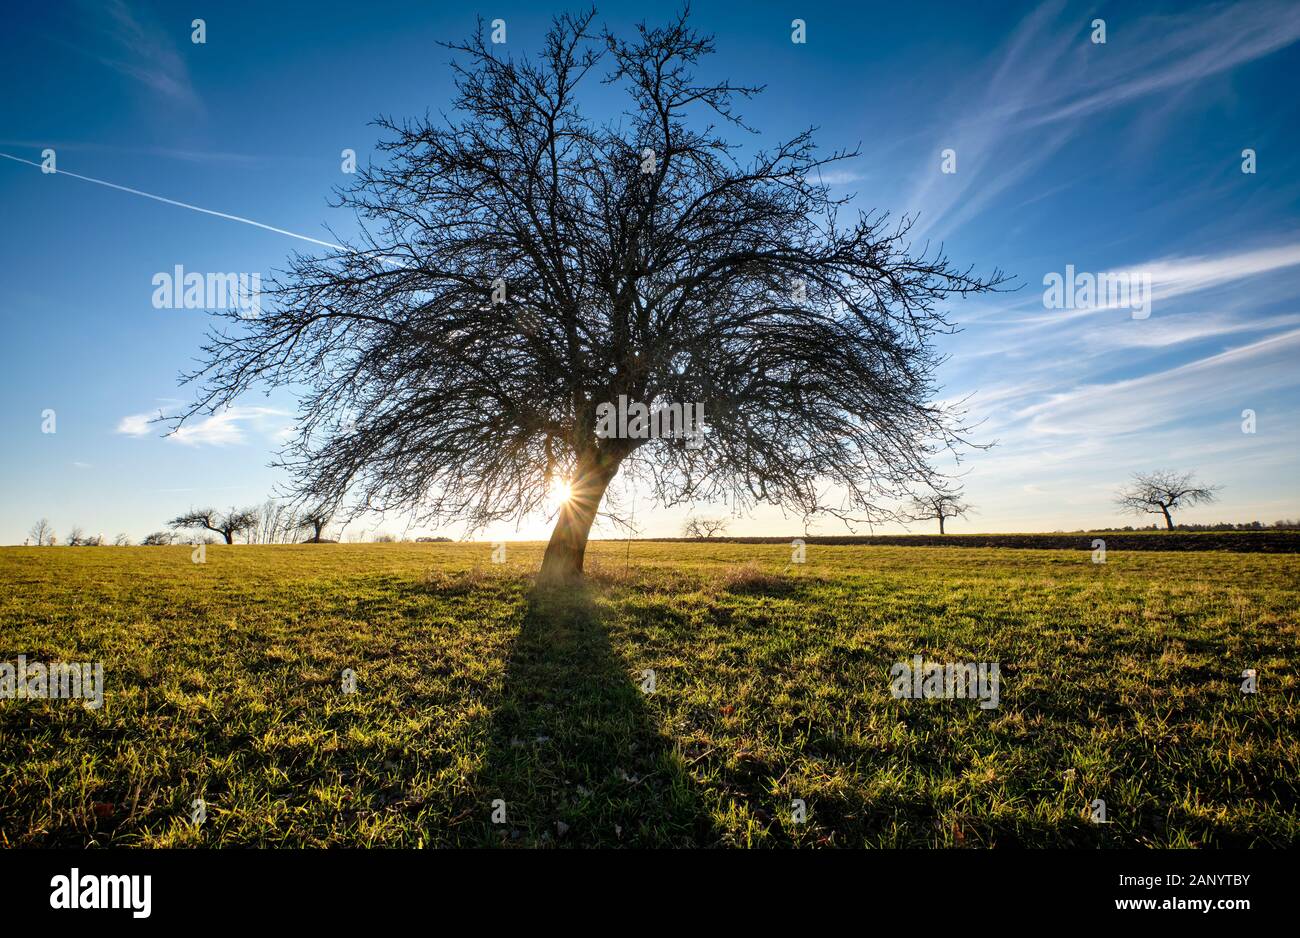 Landscape with beautiful Franconian bare tree with back lit and blue sky on a warm January day in Bavaria, Germany. Stock Photo